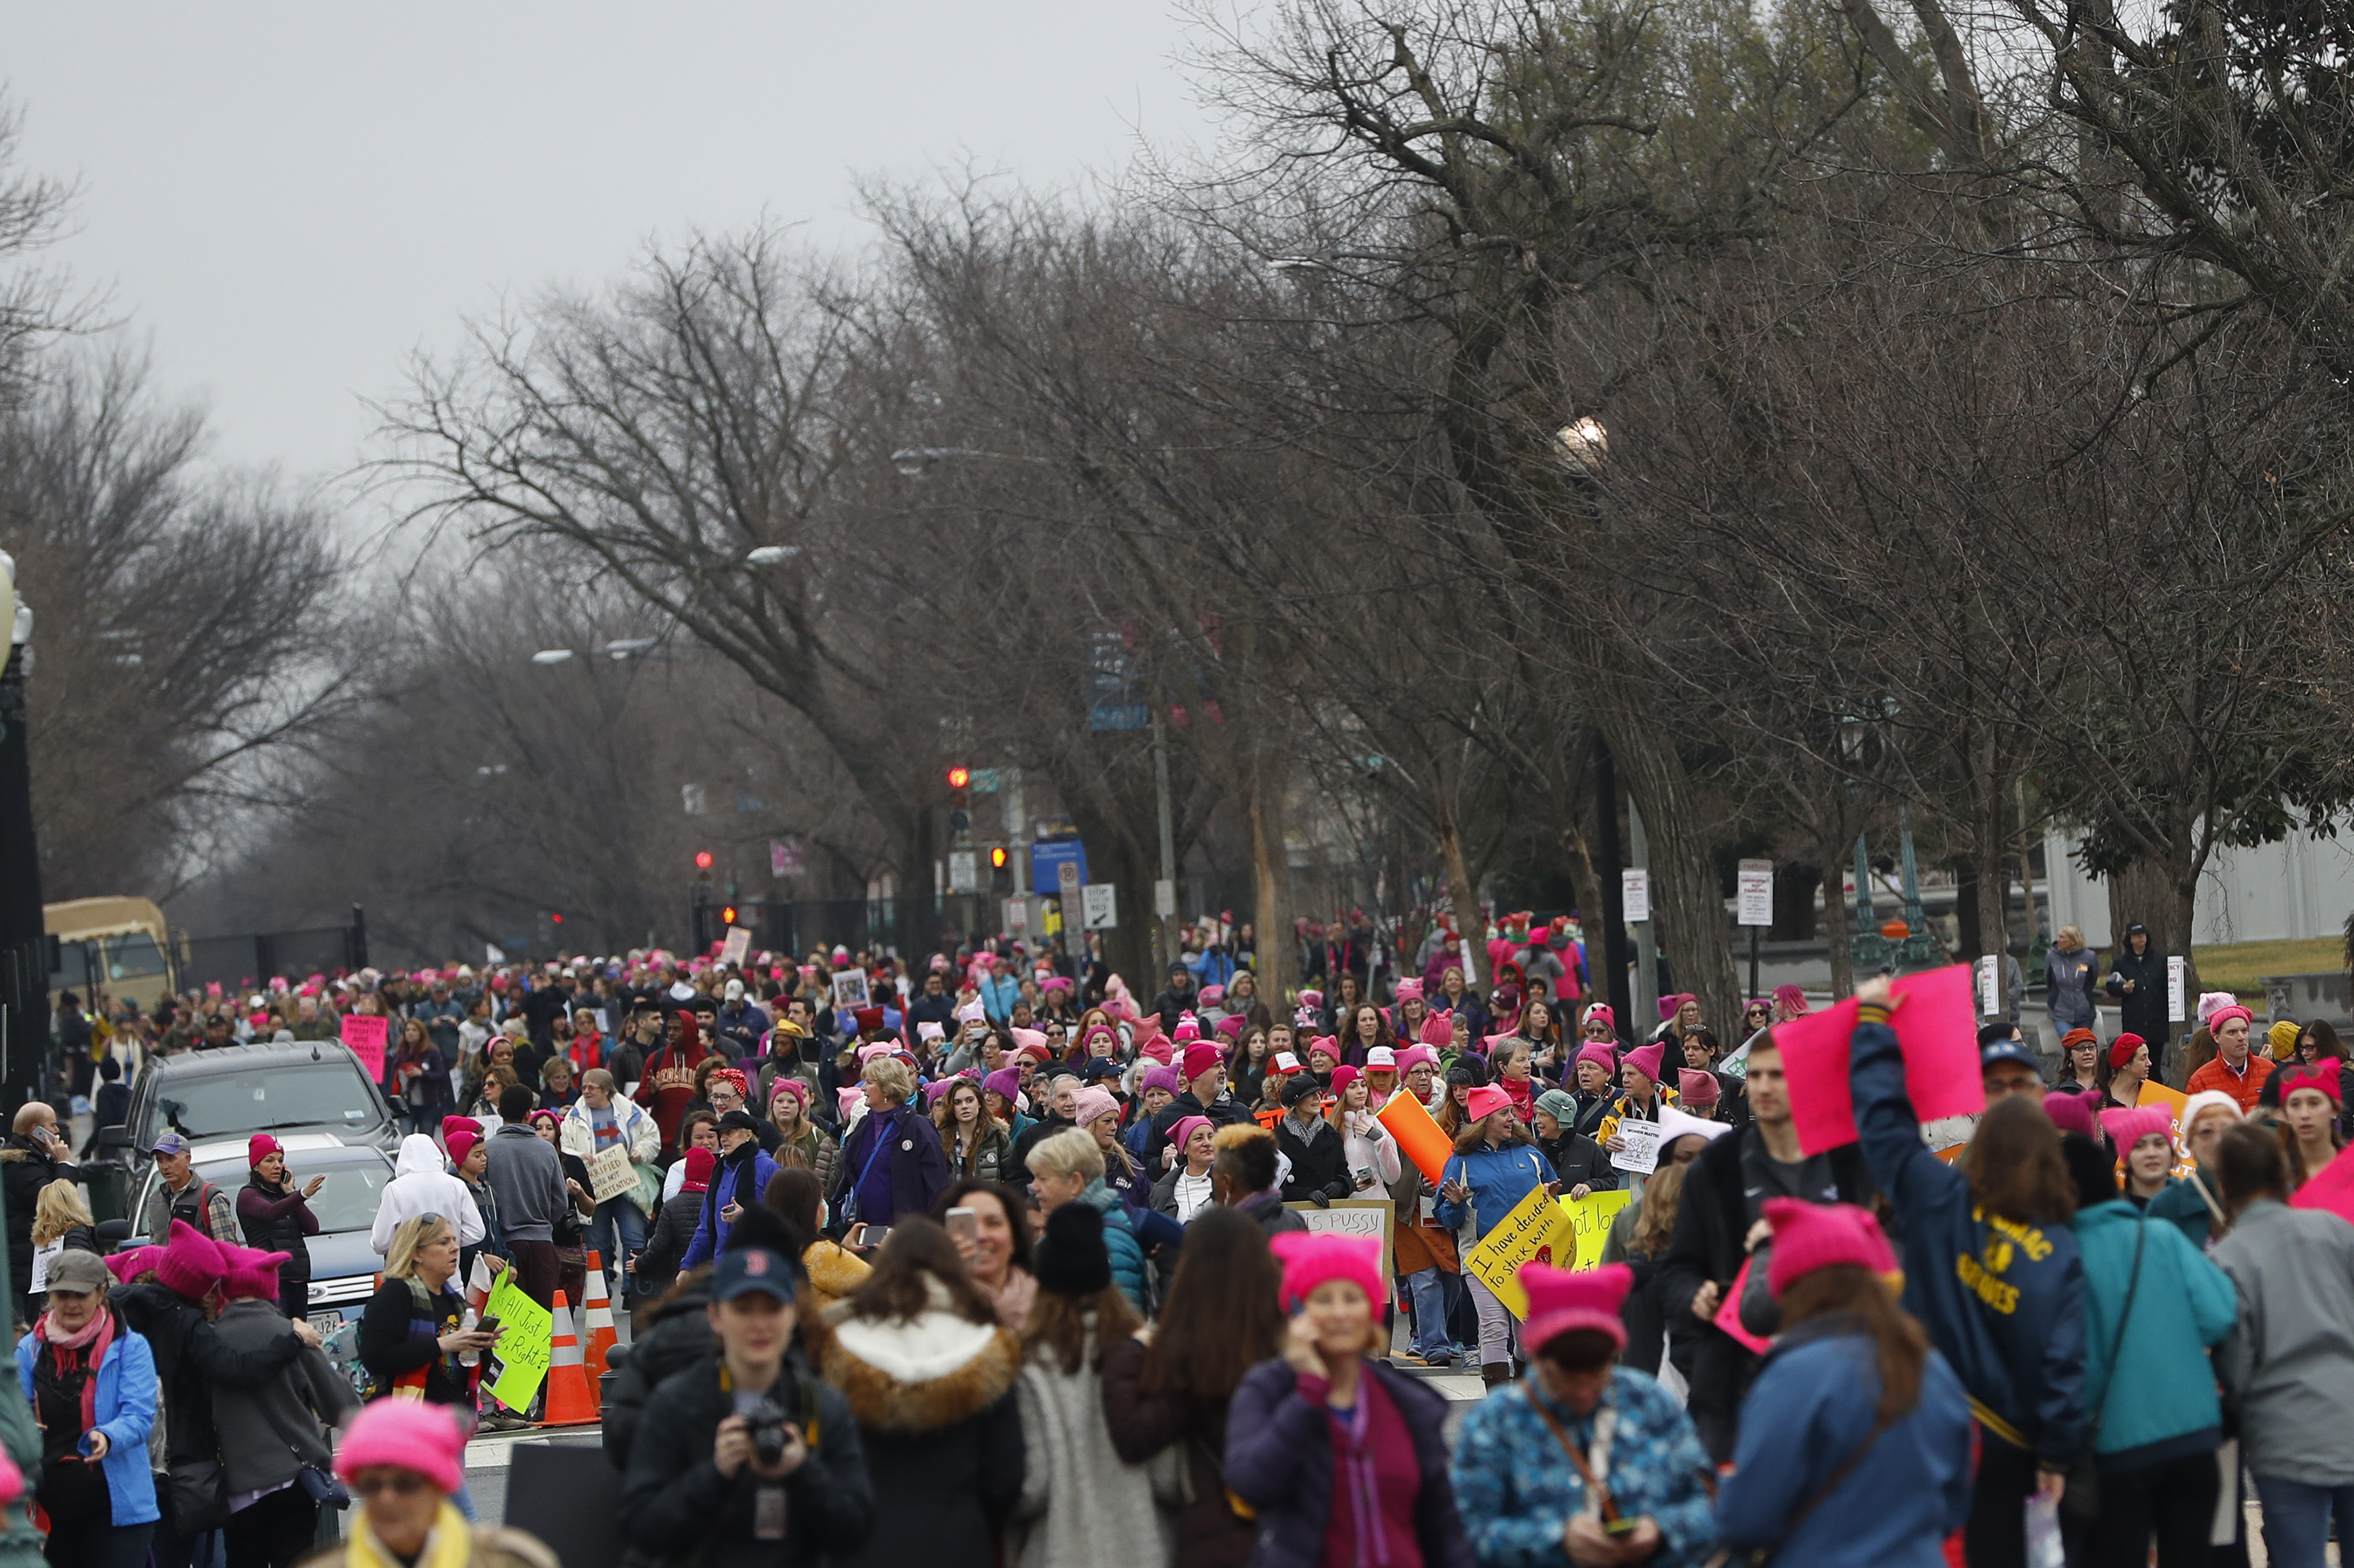 Protesters gather during the Women's March on Washington January 21, 2017 in Washington, DC. The march is expected to draw thousands from across the country to protest newly inaugurated President Donald Trump. Aaron P. Bernstein—Getty Images (Aaron P. Bernstein—Getty Images)